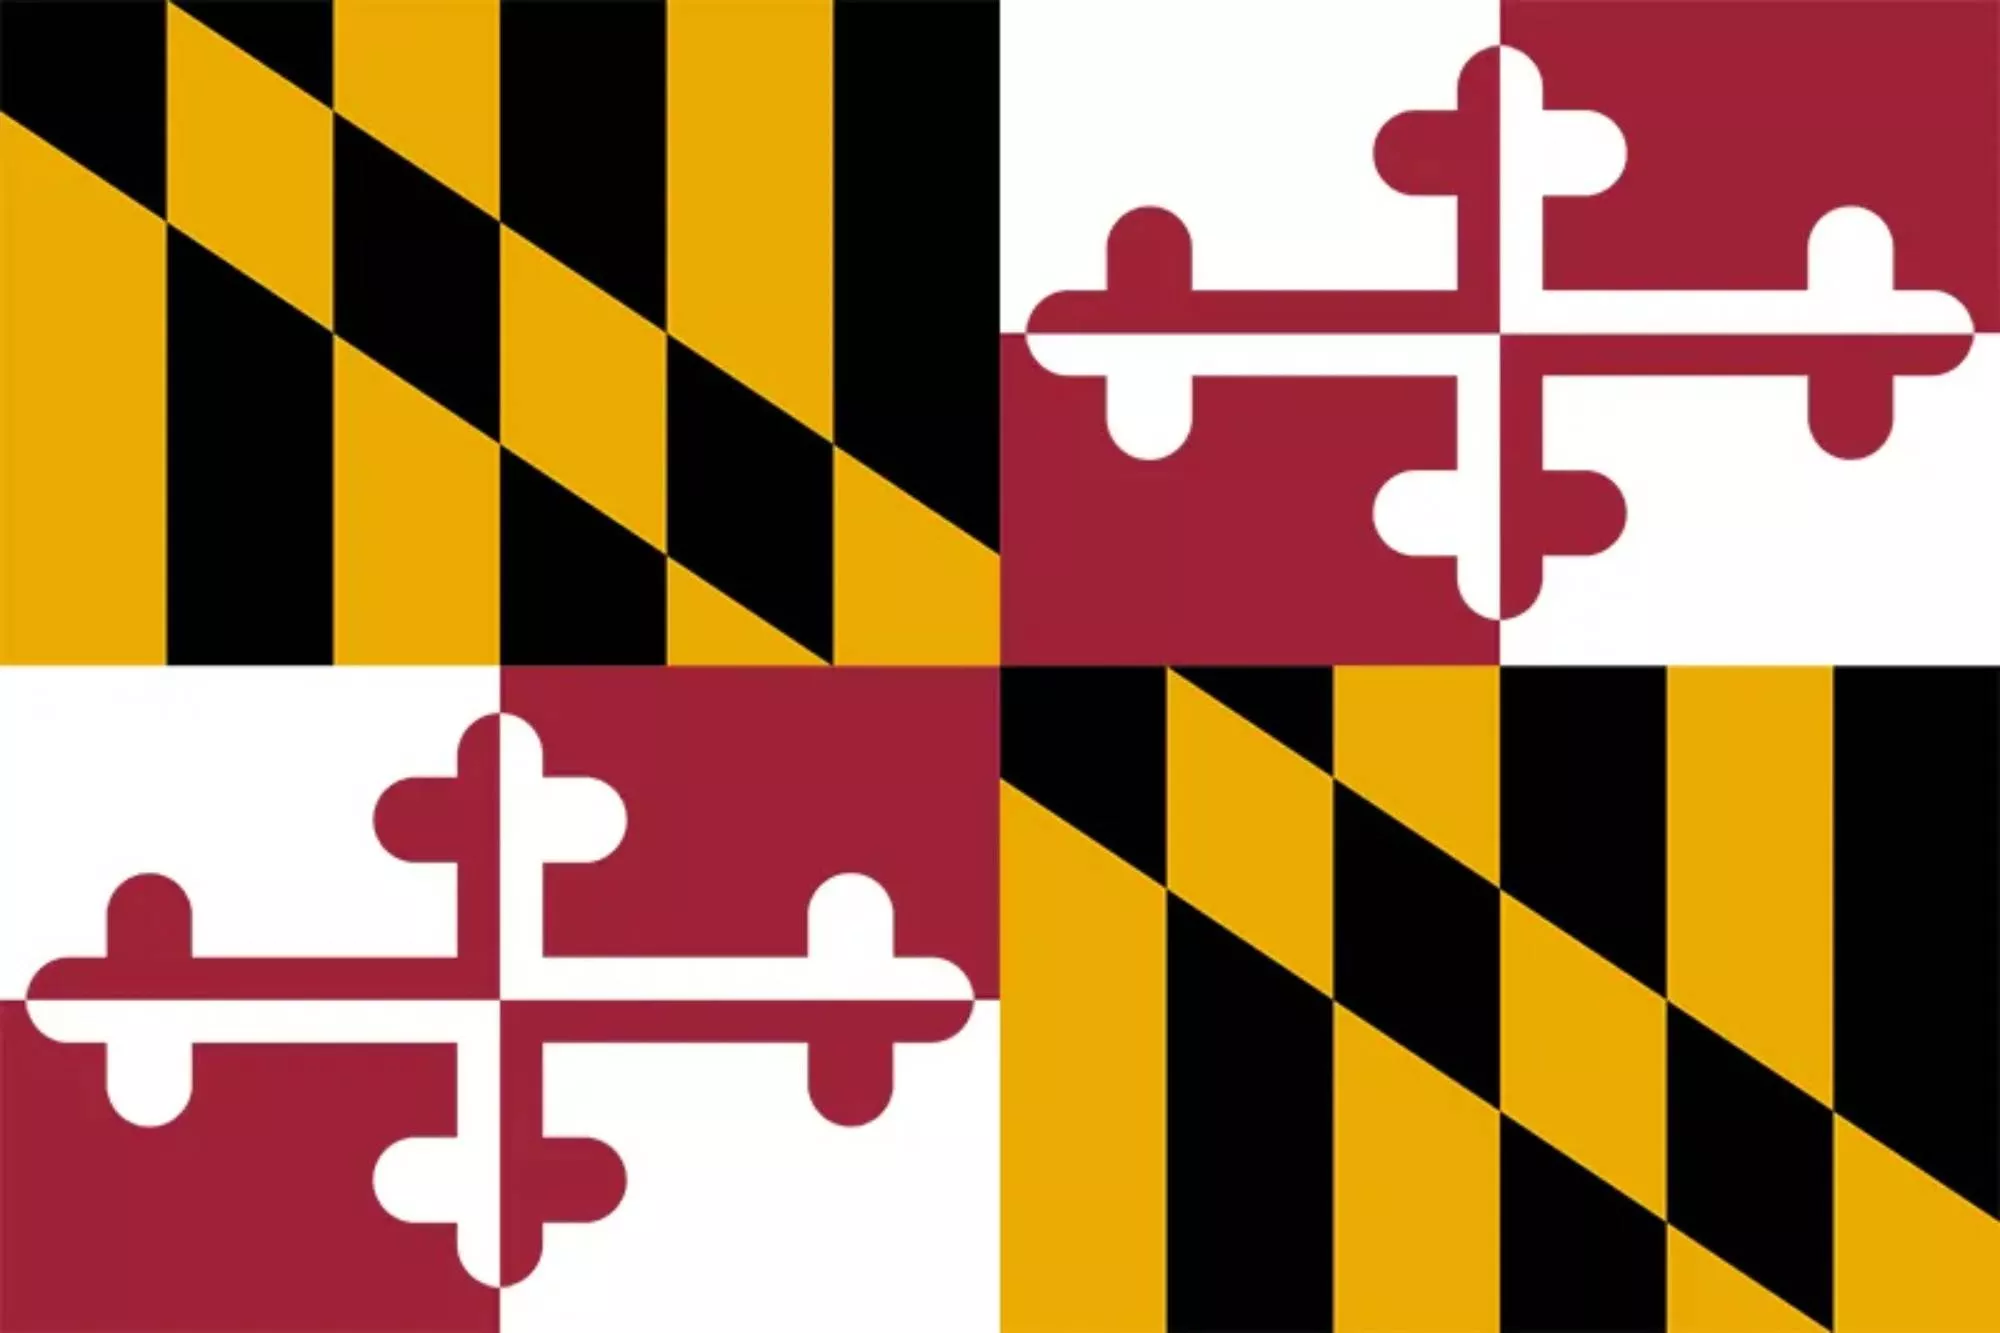 Maryland flag that americans know when getting an FFL in Maryland